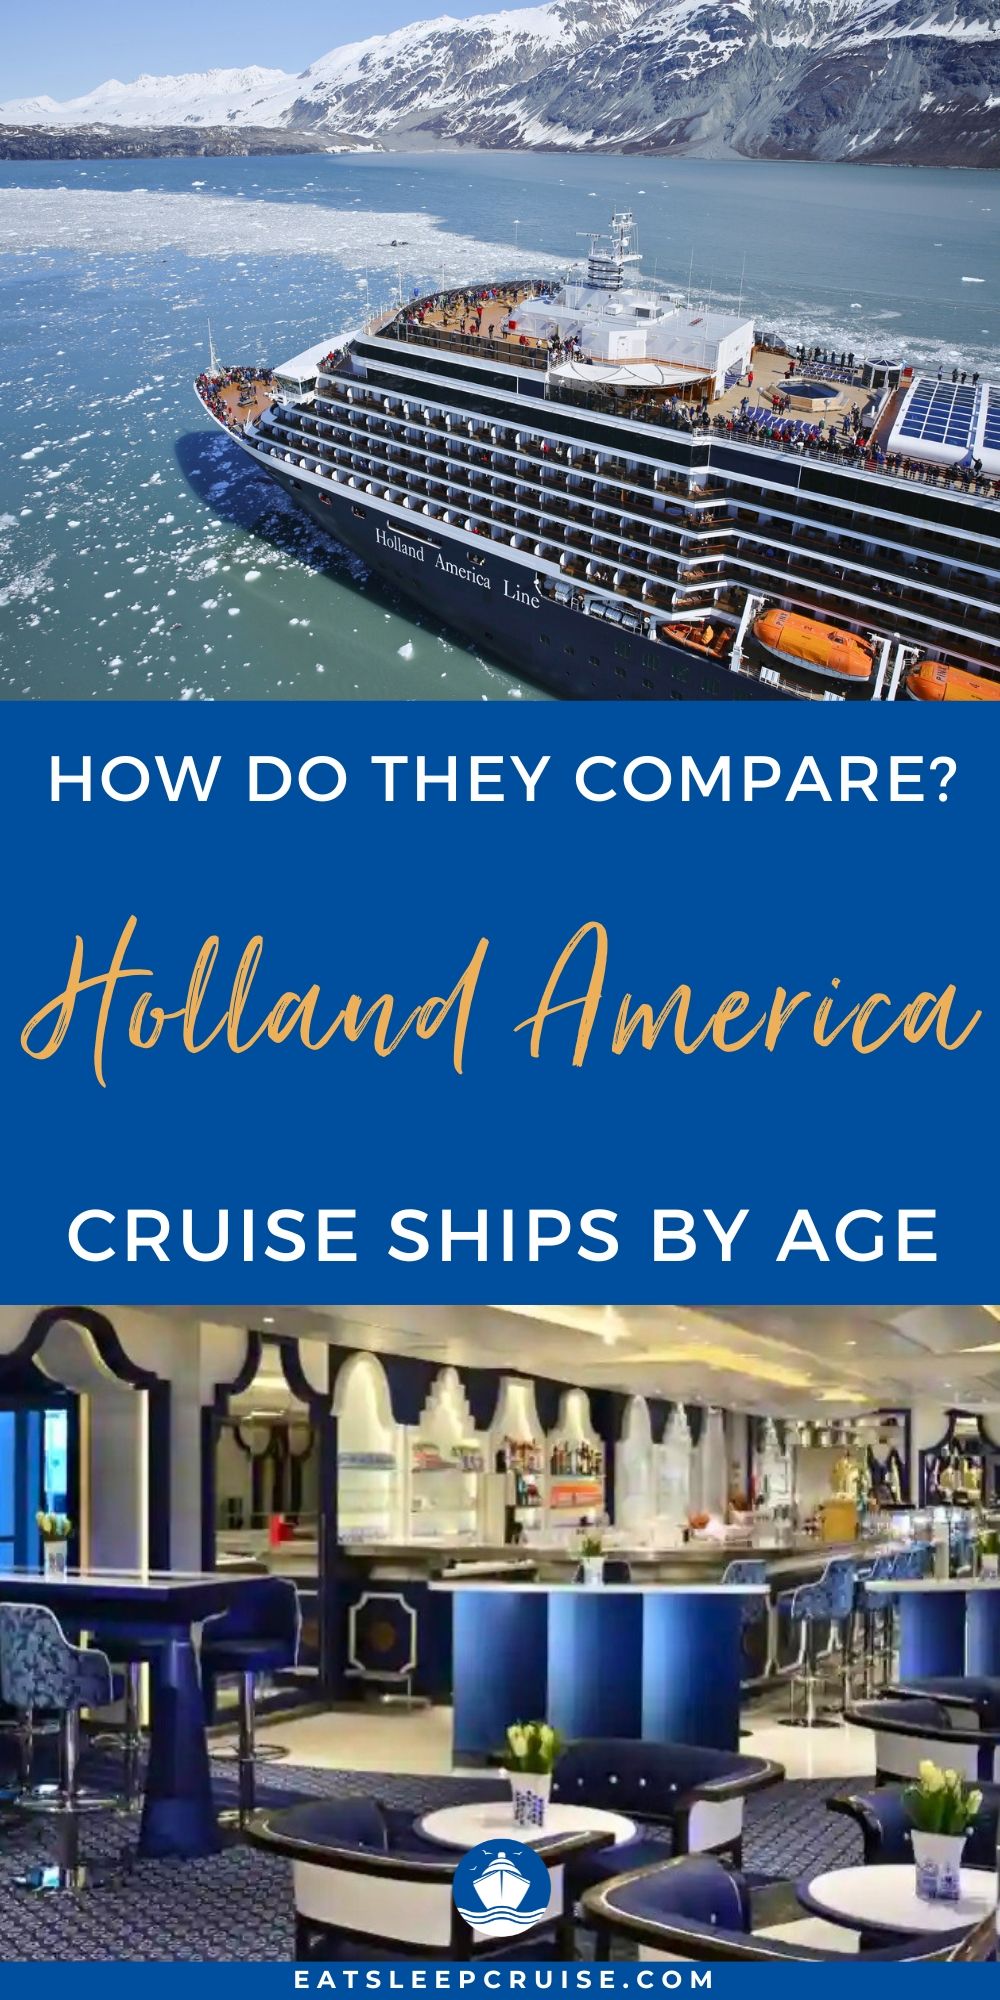 Holland America Cruise Ships: Newest to Oldest